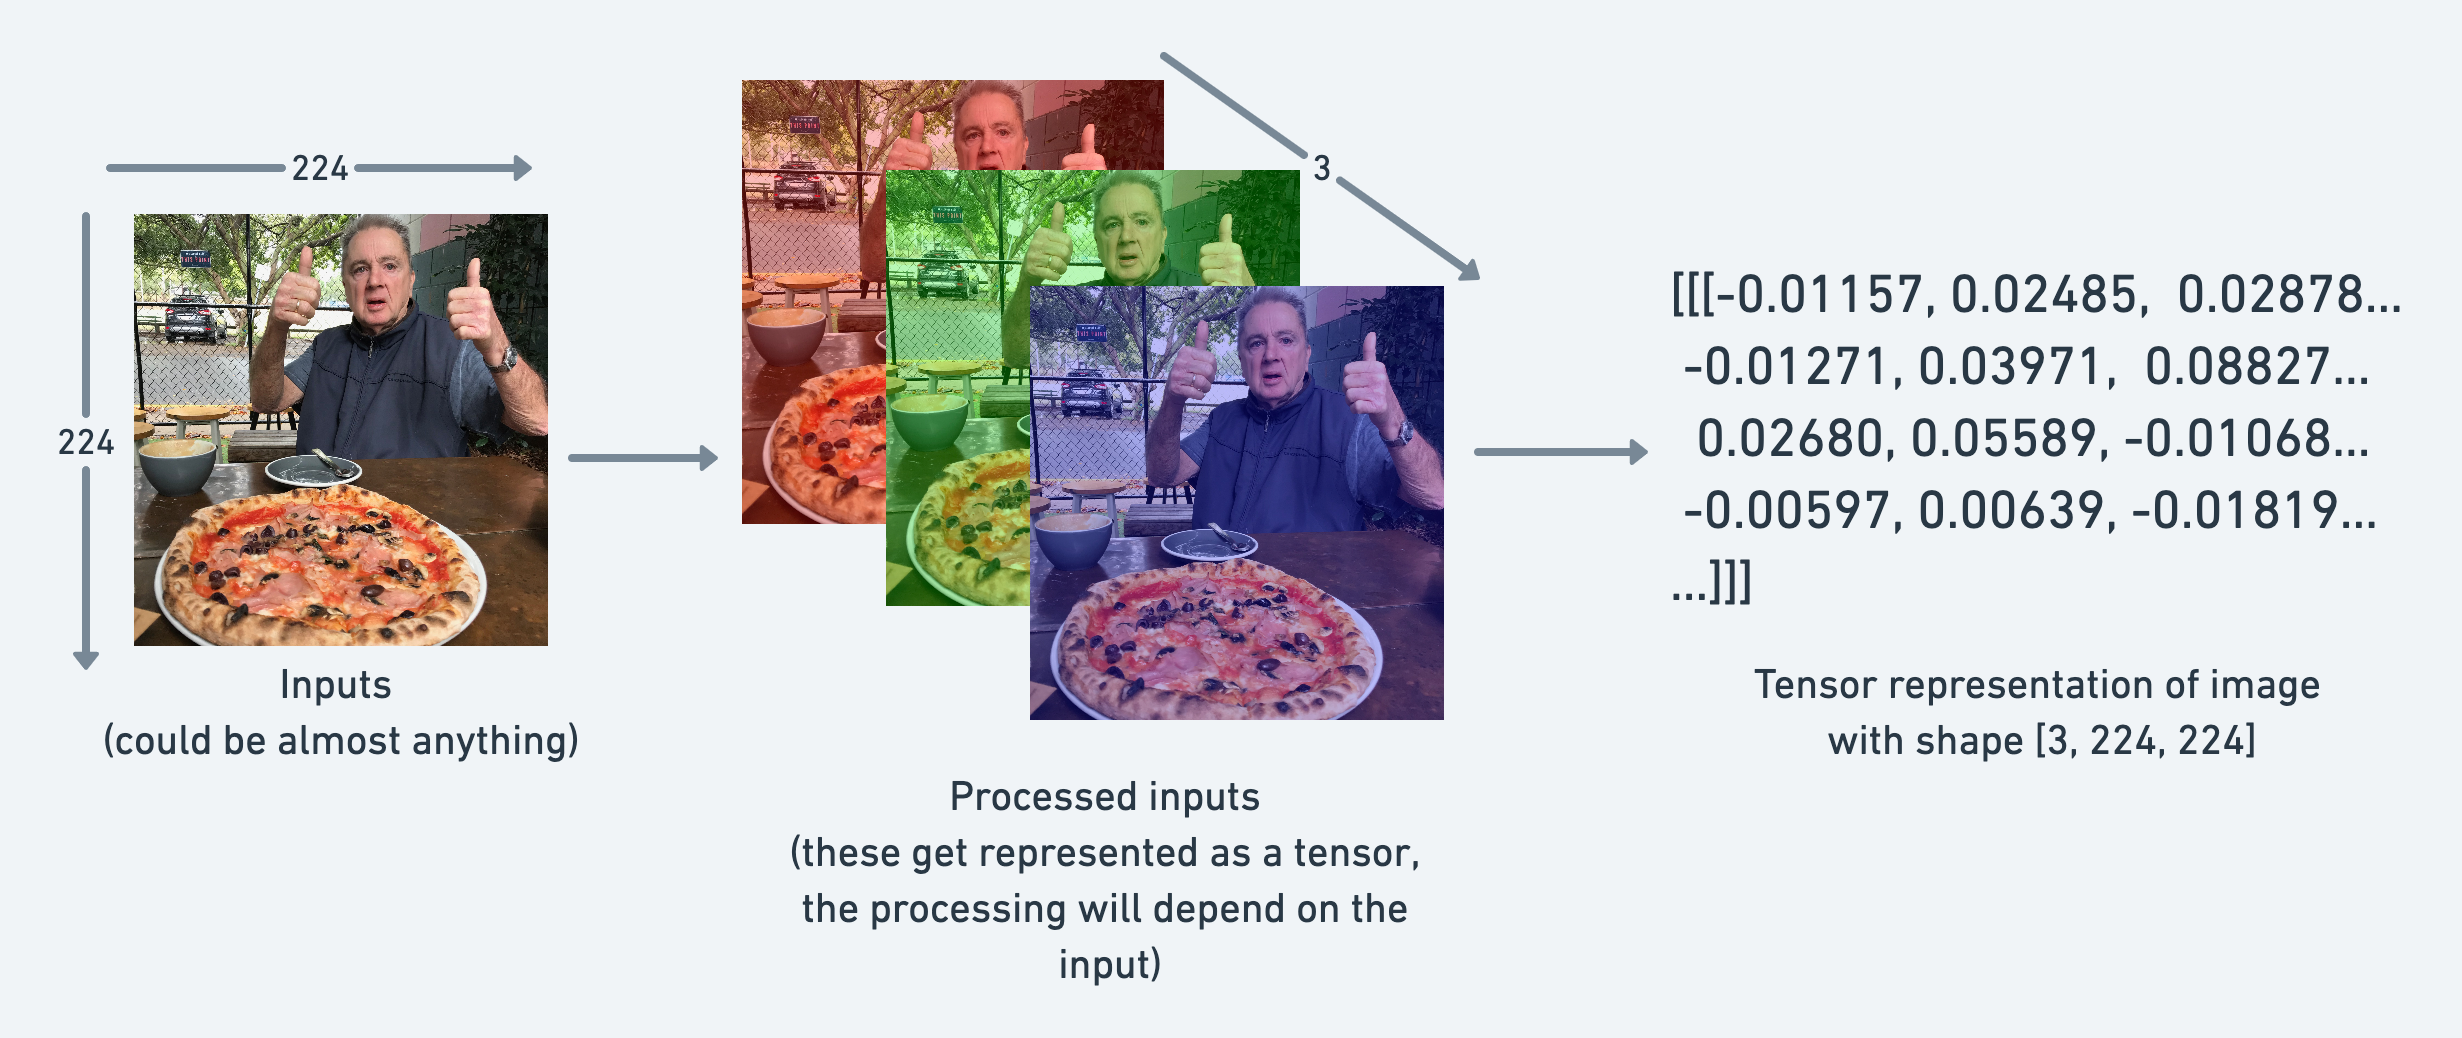 example of going from an input image to a tensor representation of the image, image gets broken down into 3 colour channels as well as numbers to represent the height and width